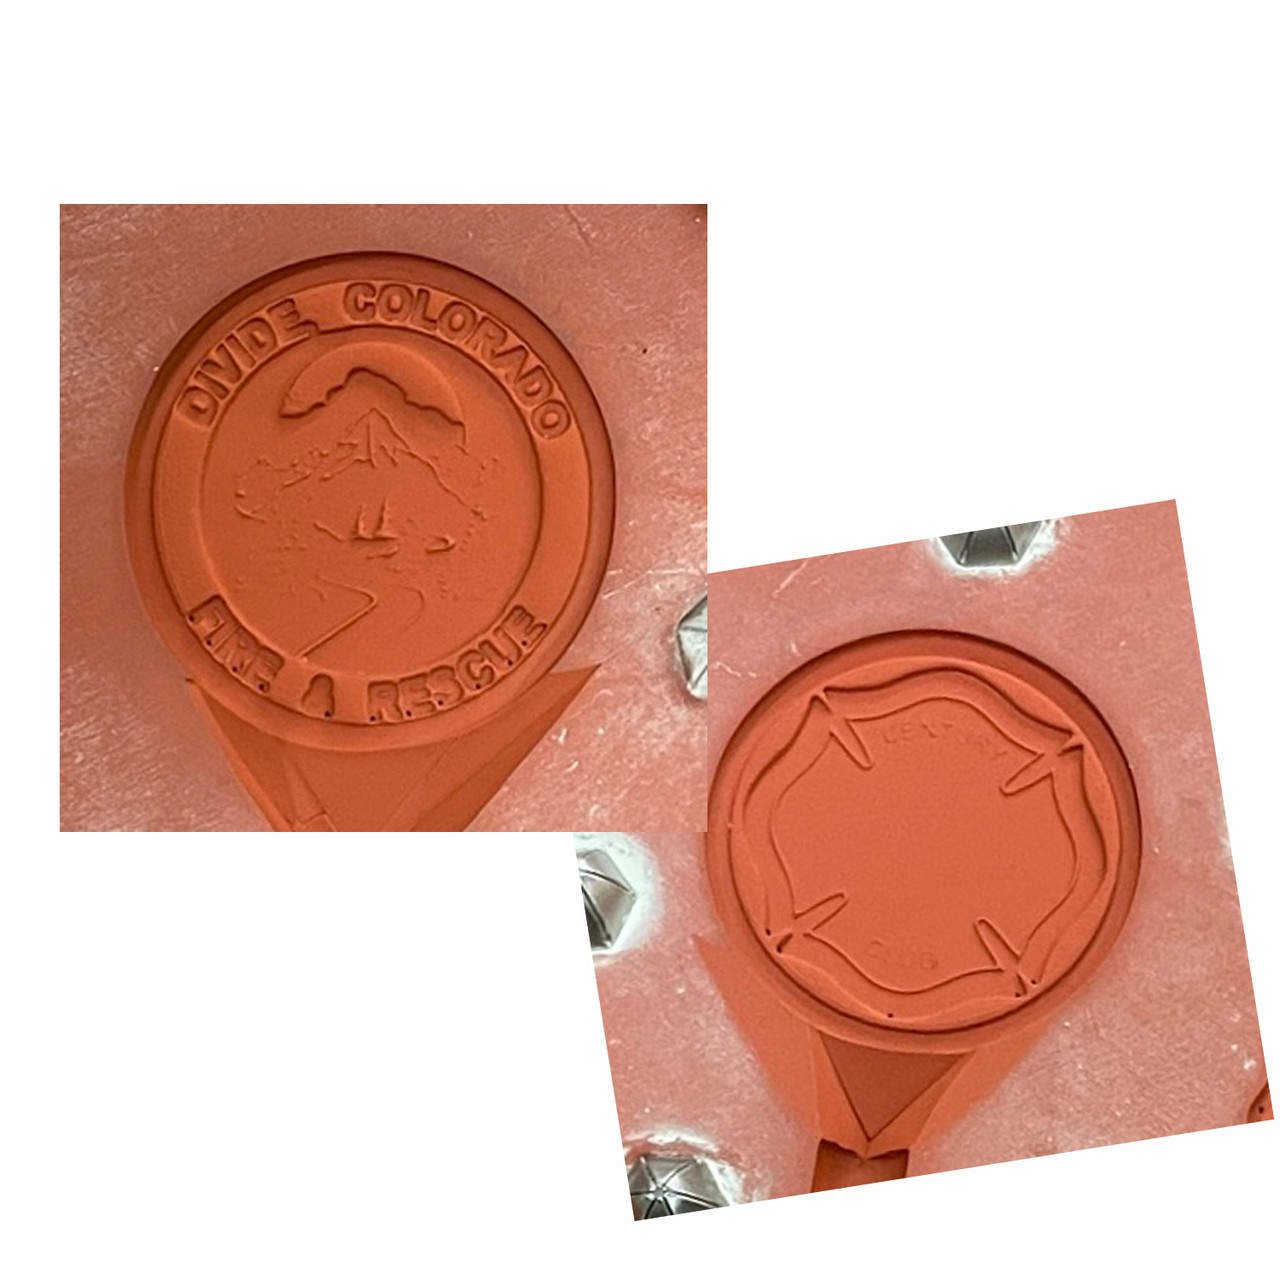 Divide Colorado Crest Coin - Bronze Only (RESTRICTED)